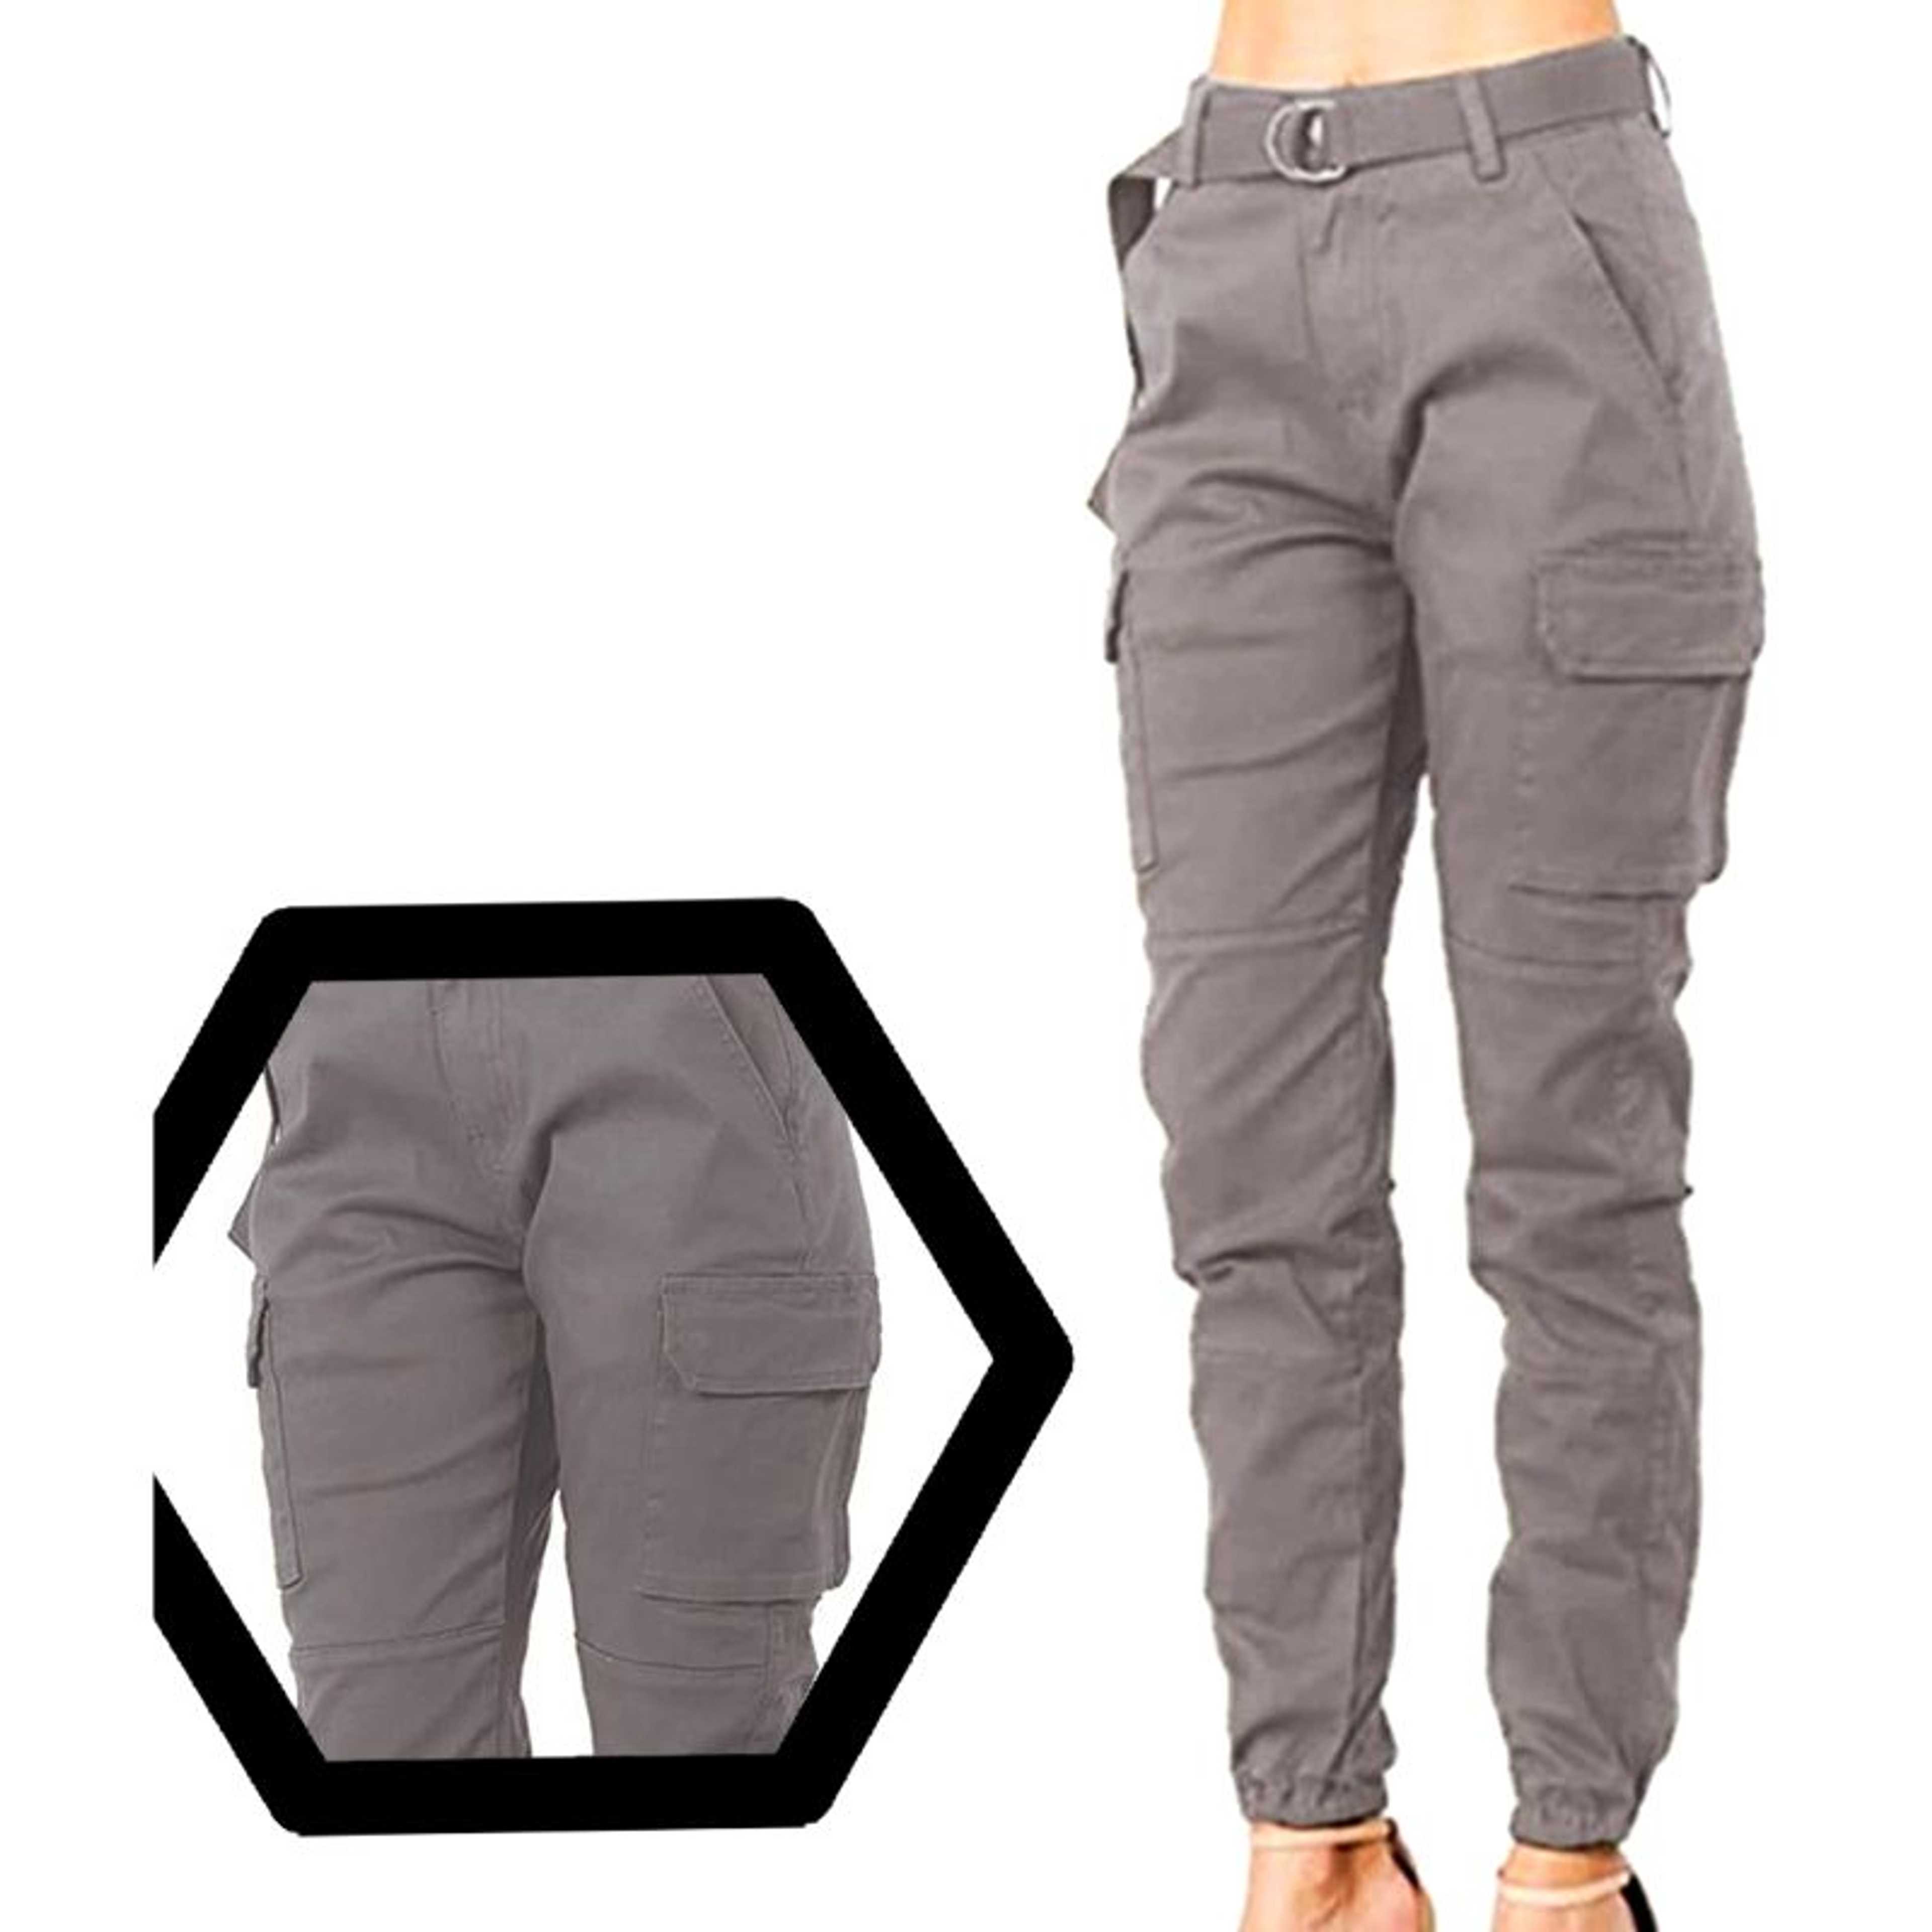 Grey Color Rubahas Womens Cargo Trousers Ladies Trousers Jeans Pants